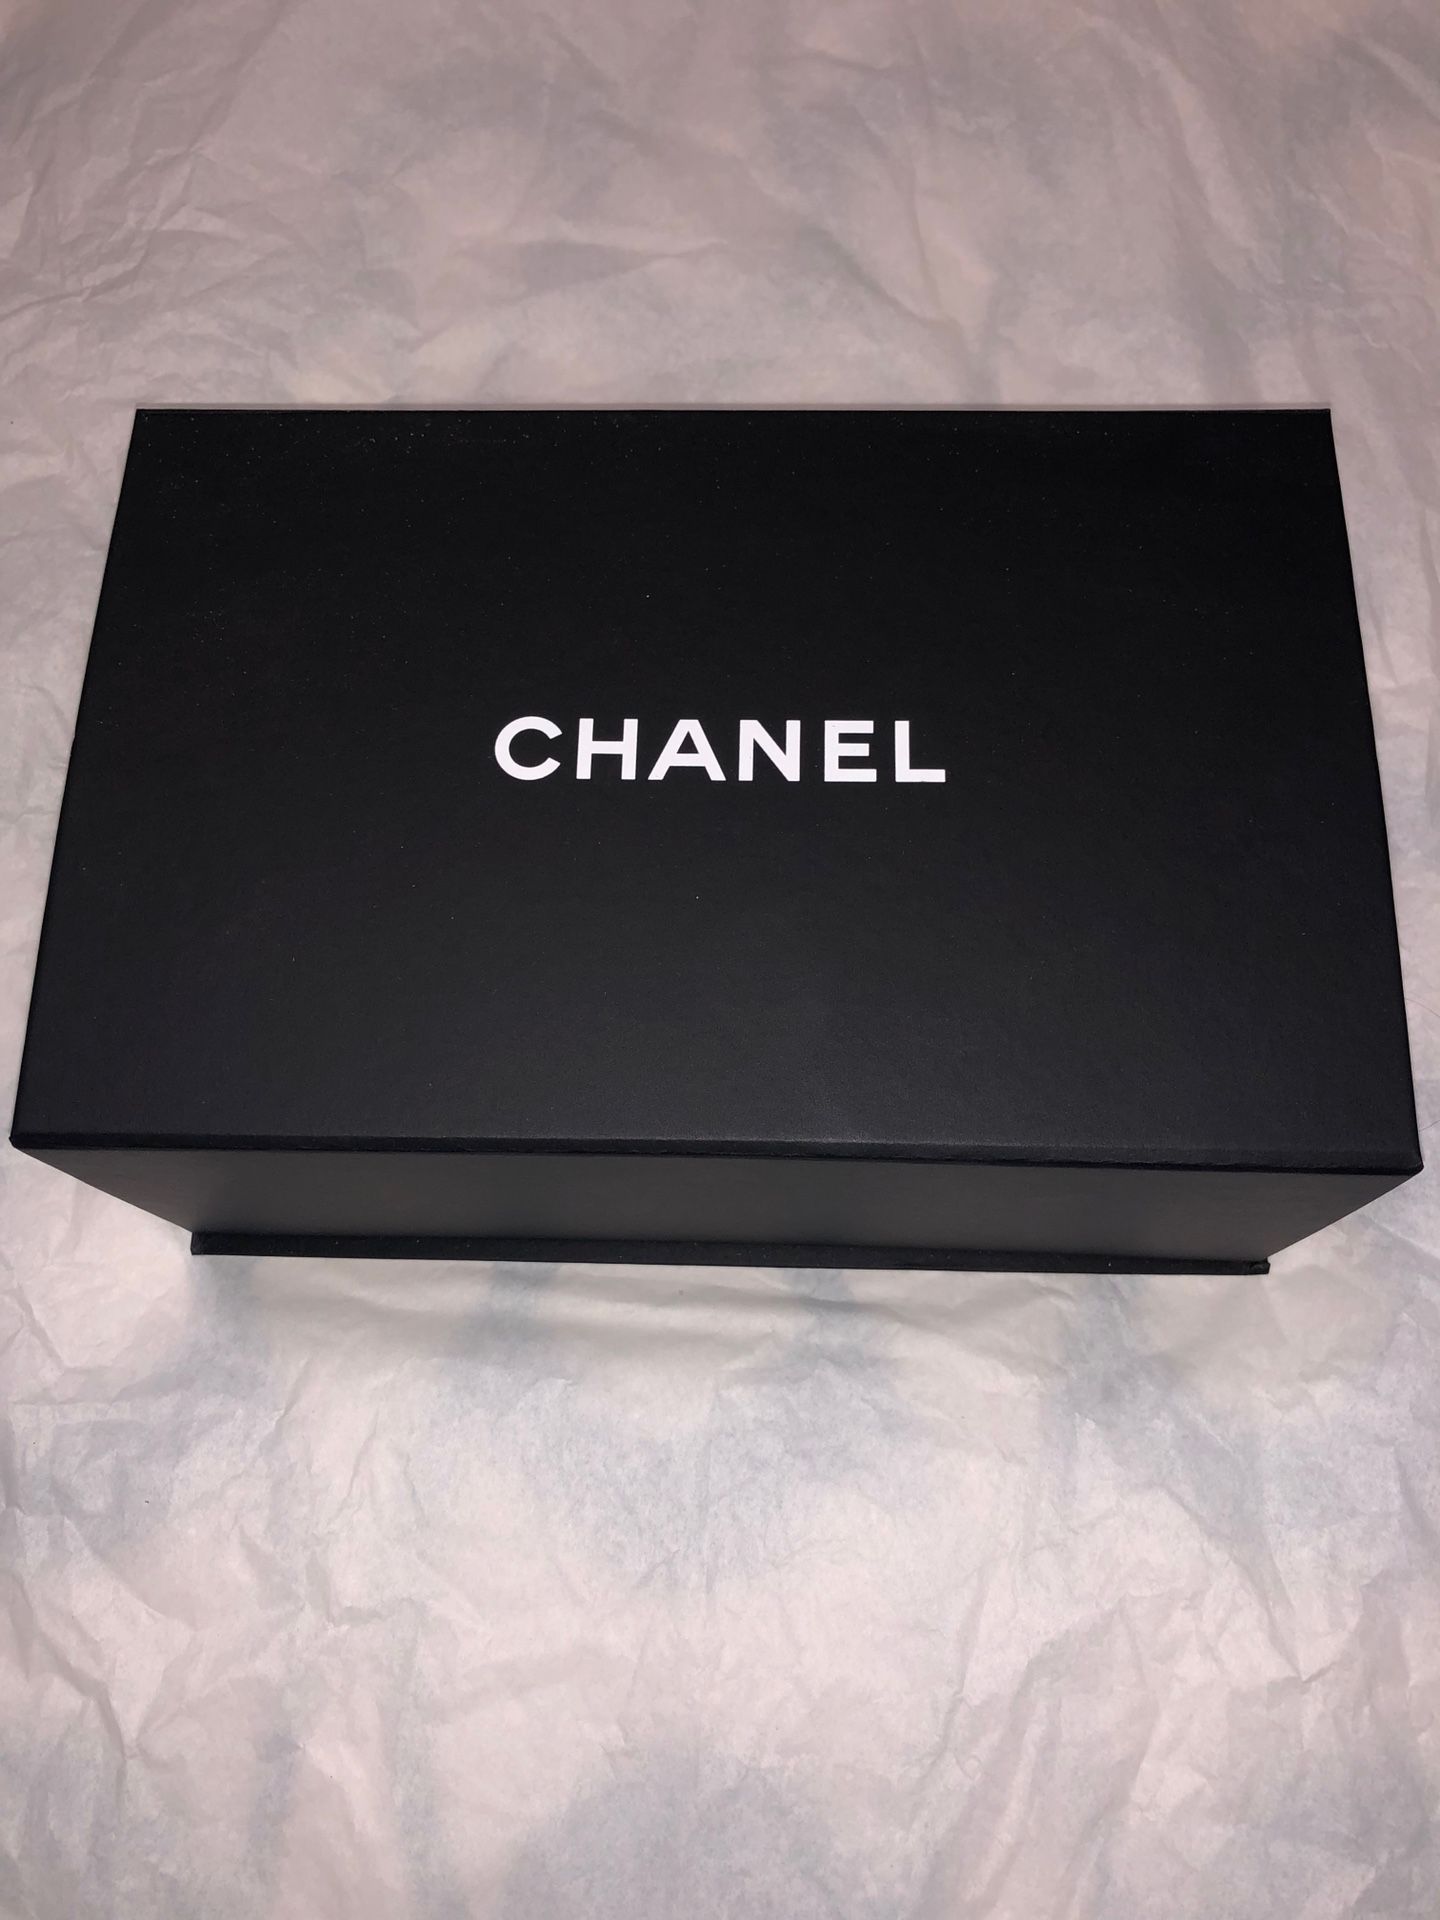 Like New Authentic Chanel Bag